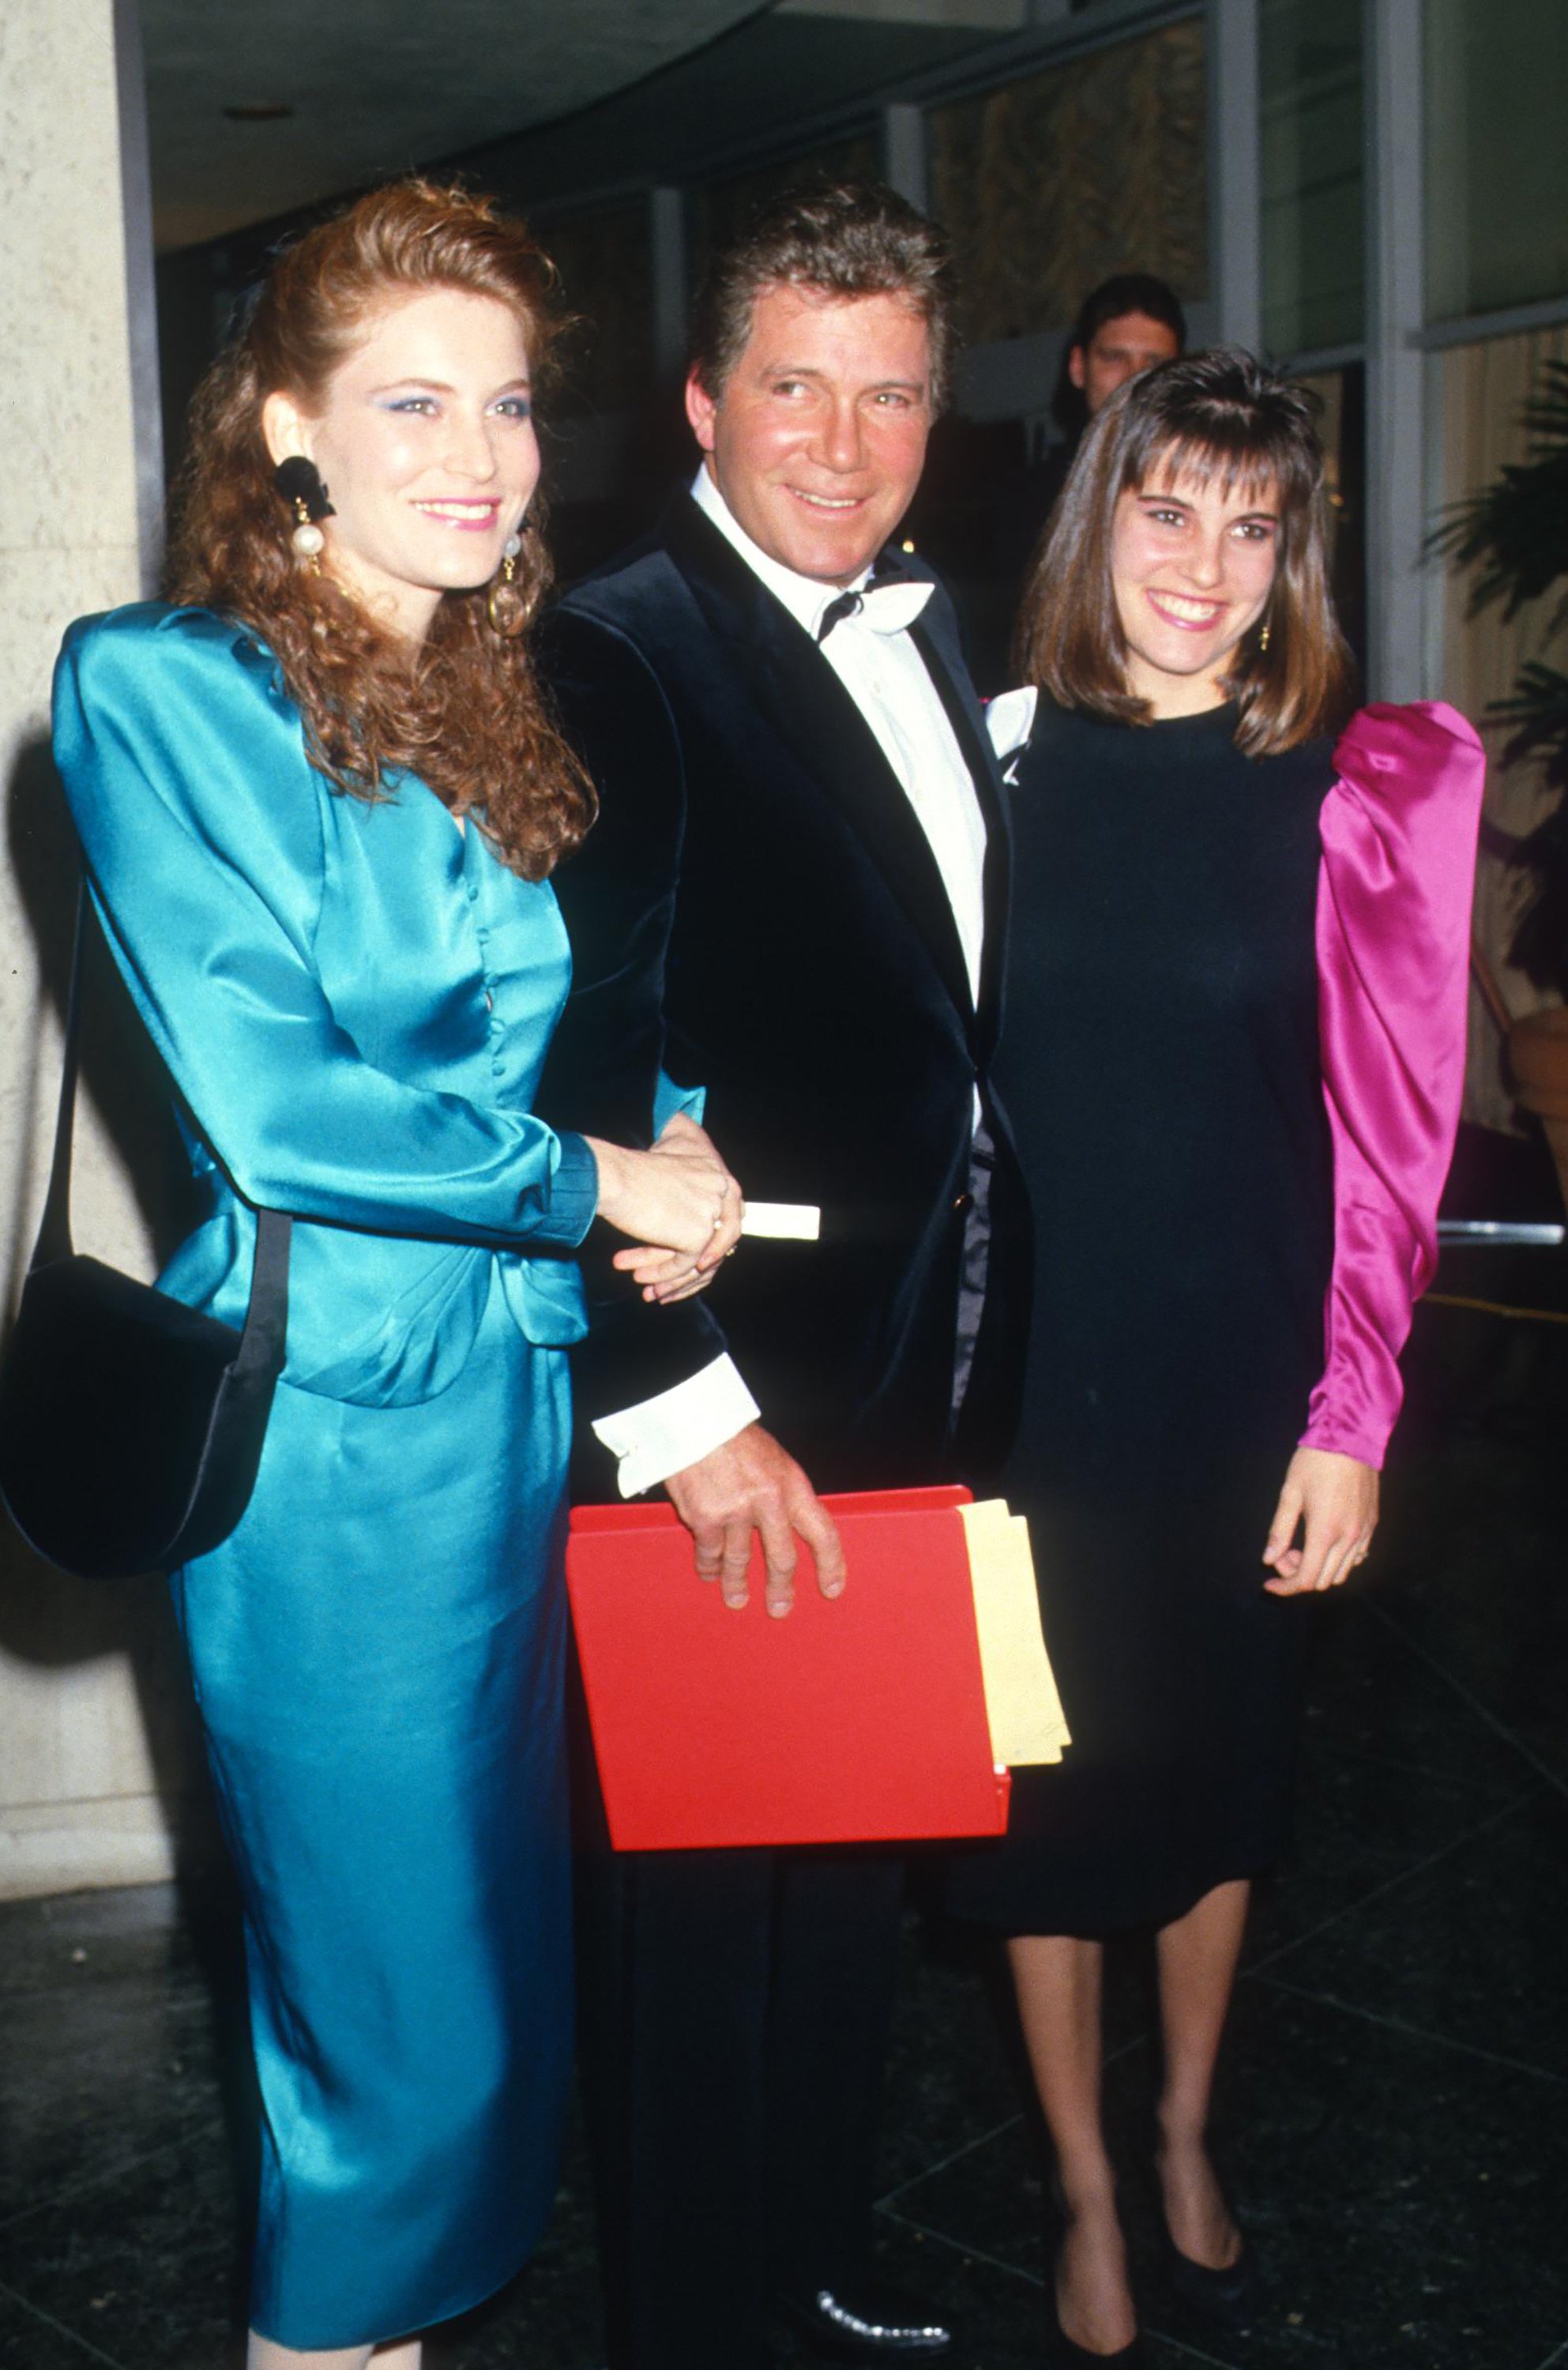 William Shatner and two of his daughters at the 44th Annual Golden Globe Awards in California on January 31, 1987. | Source: Getty Images